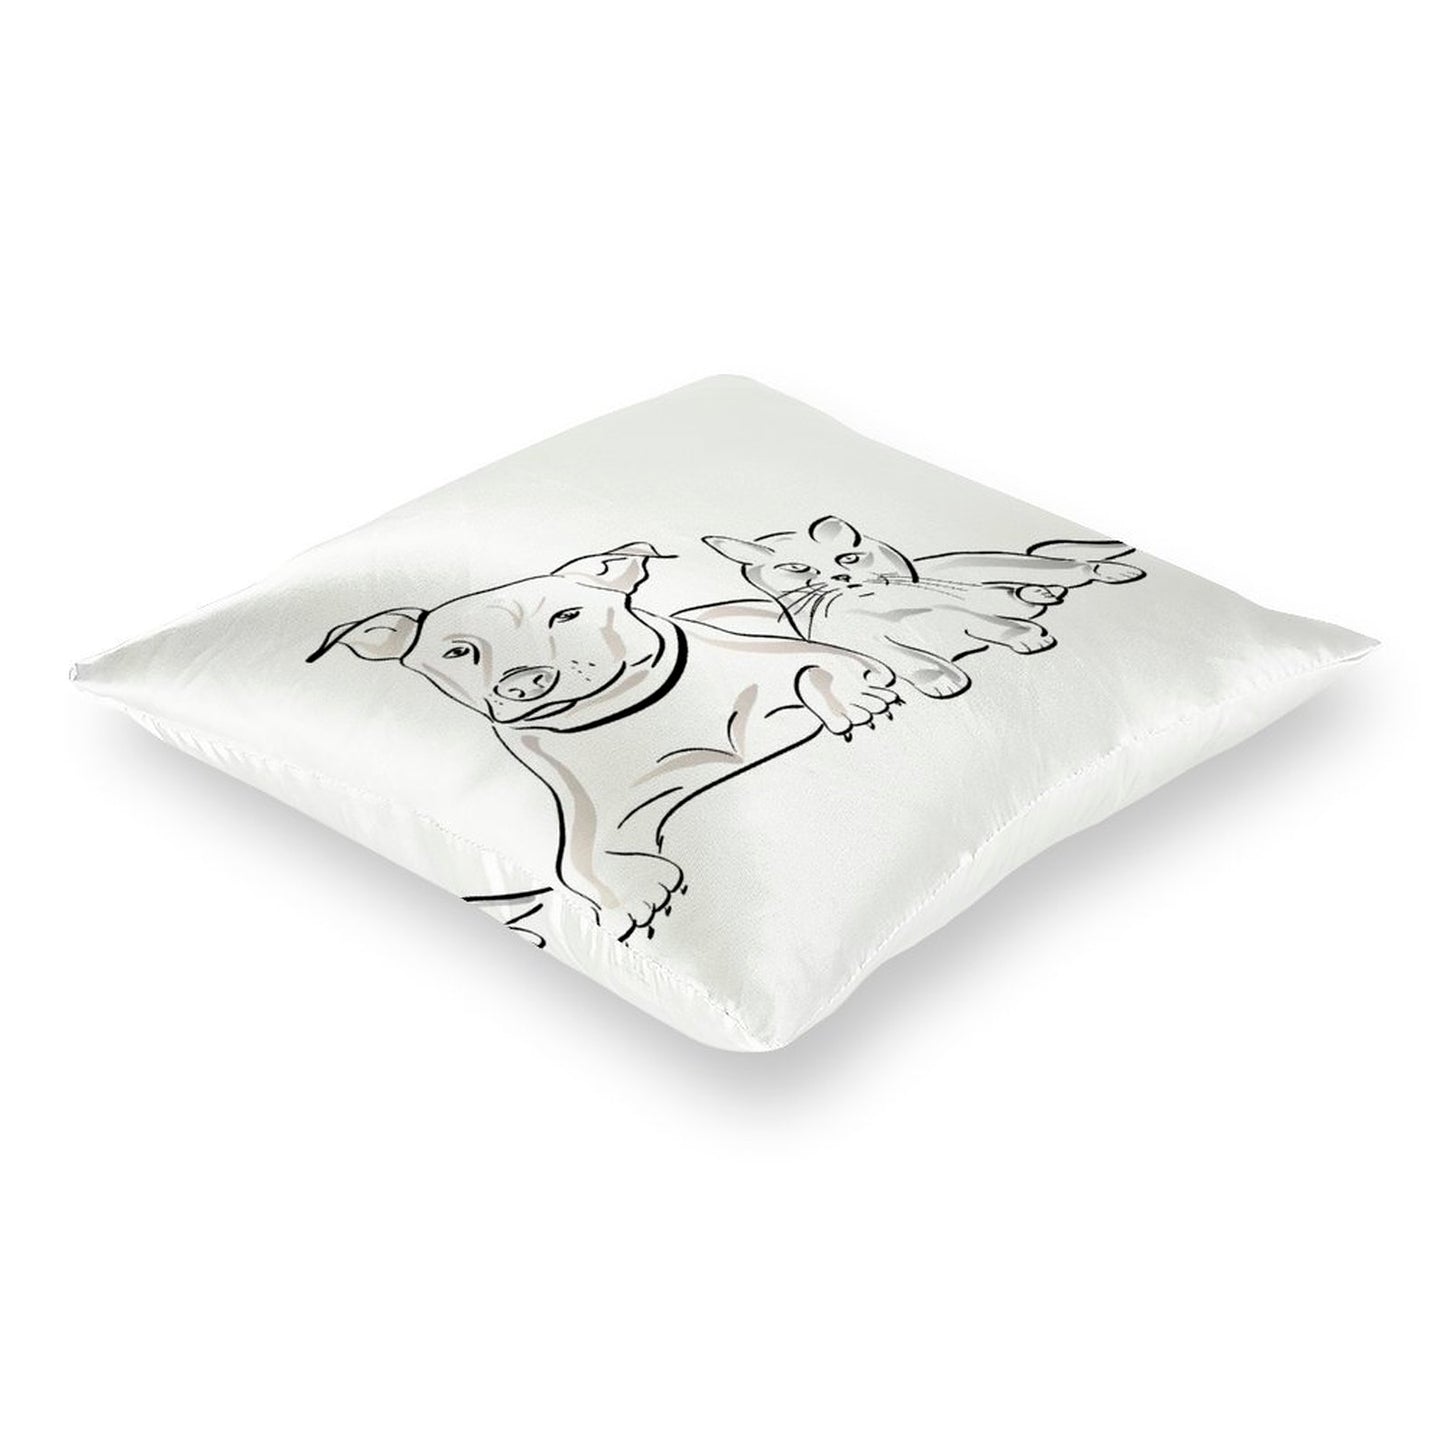 Online Custom Satin Pillow Case Sketch Drawing Dog & Cat White Background Only Pillowcase